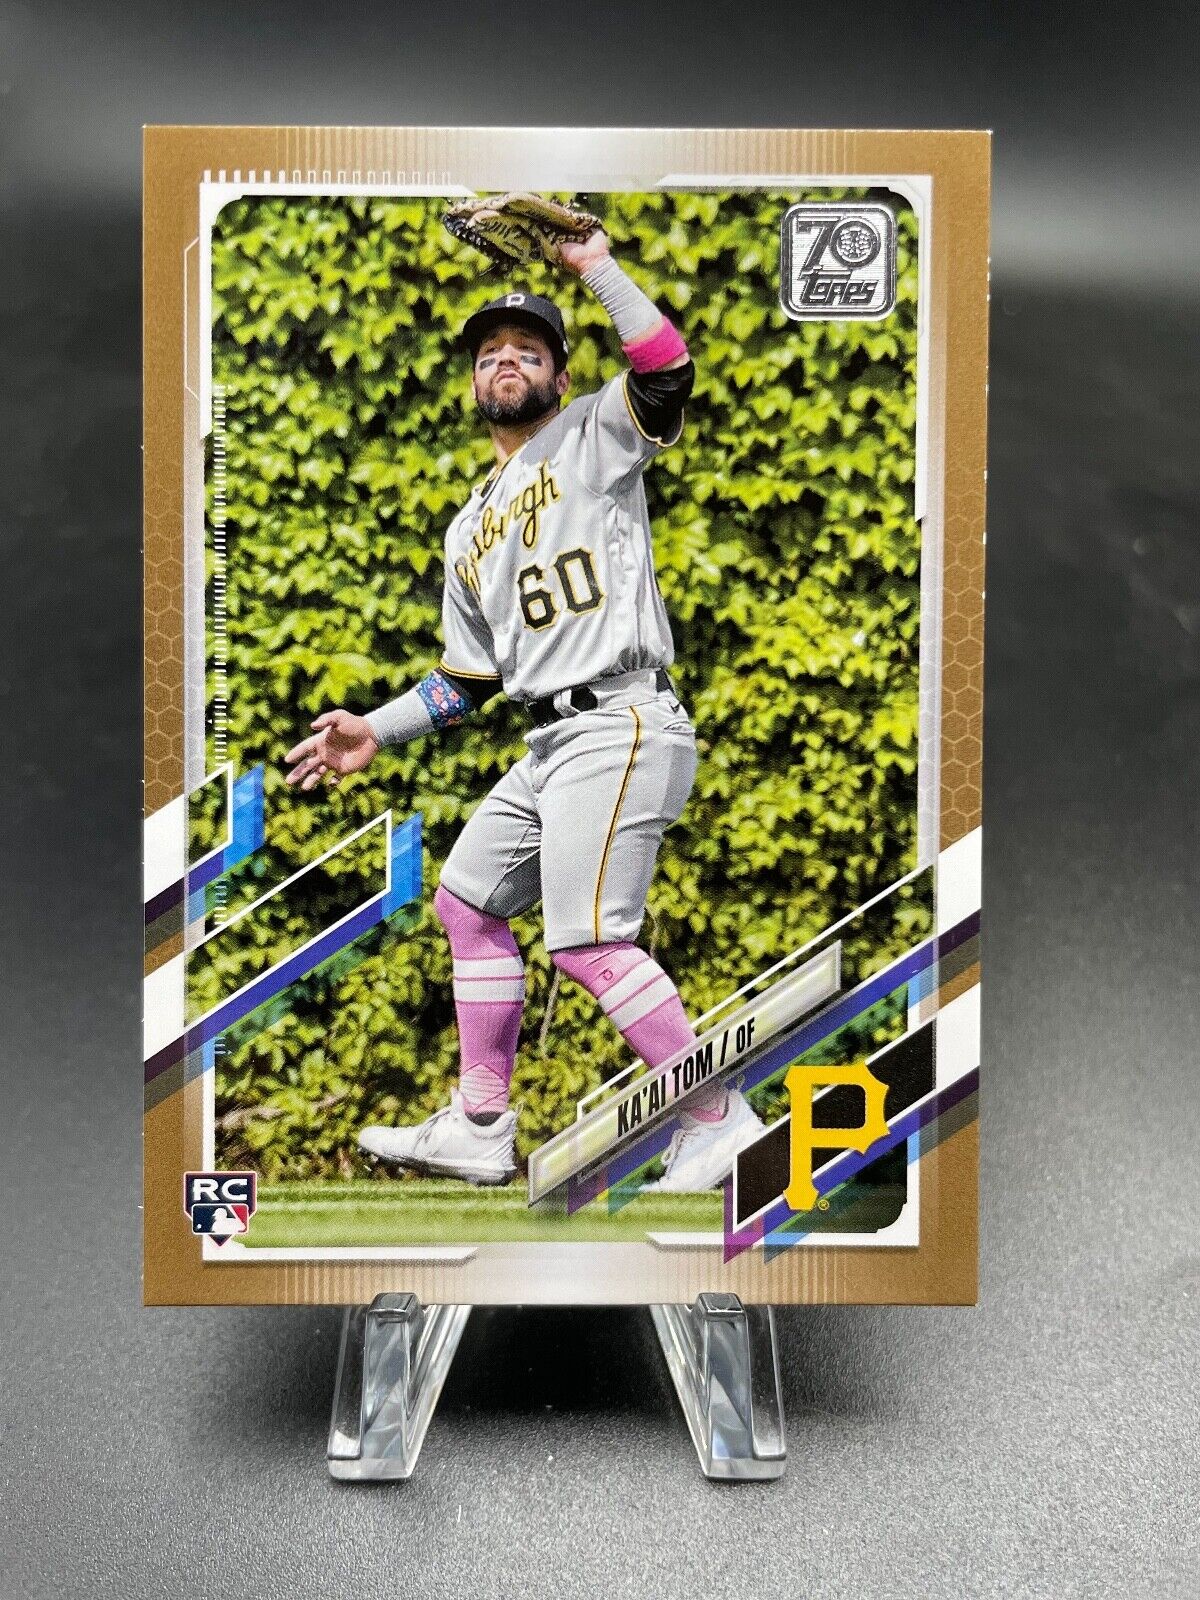 KA’AI TOM RC - 2021 Topps UPDATE - GOLD - Card #US152 - PIRATES/GIANTS ROOKIE. rookie card picture